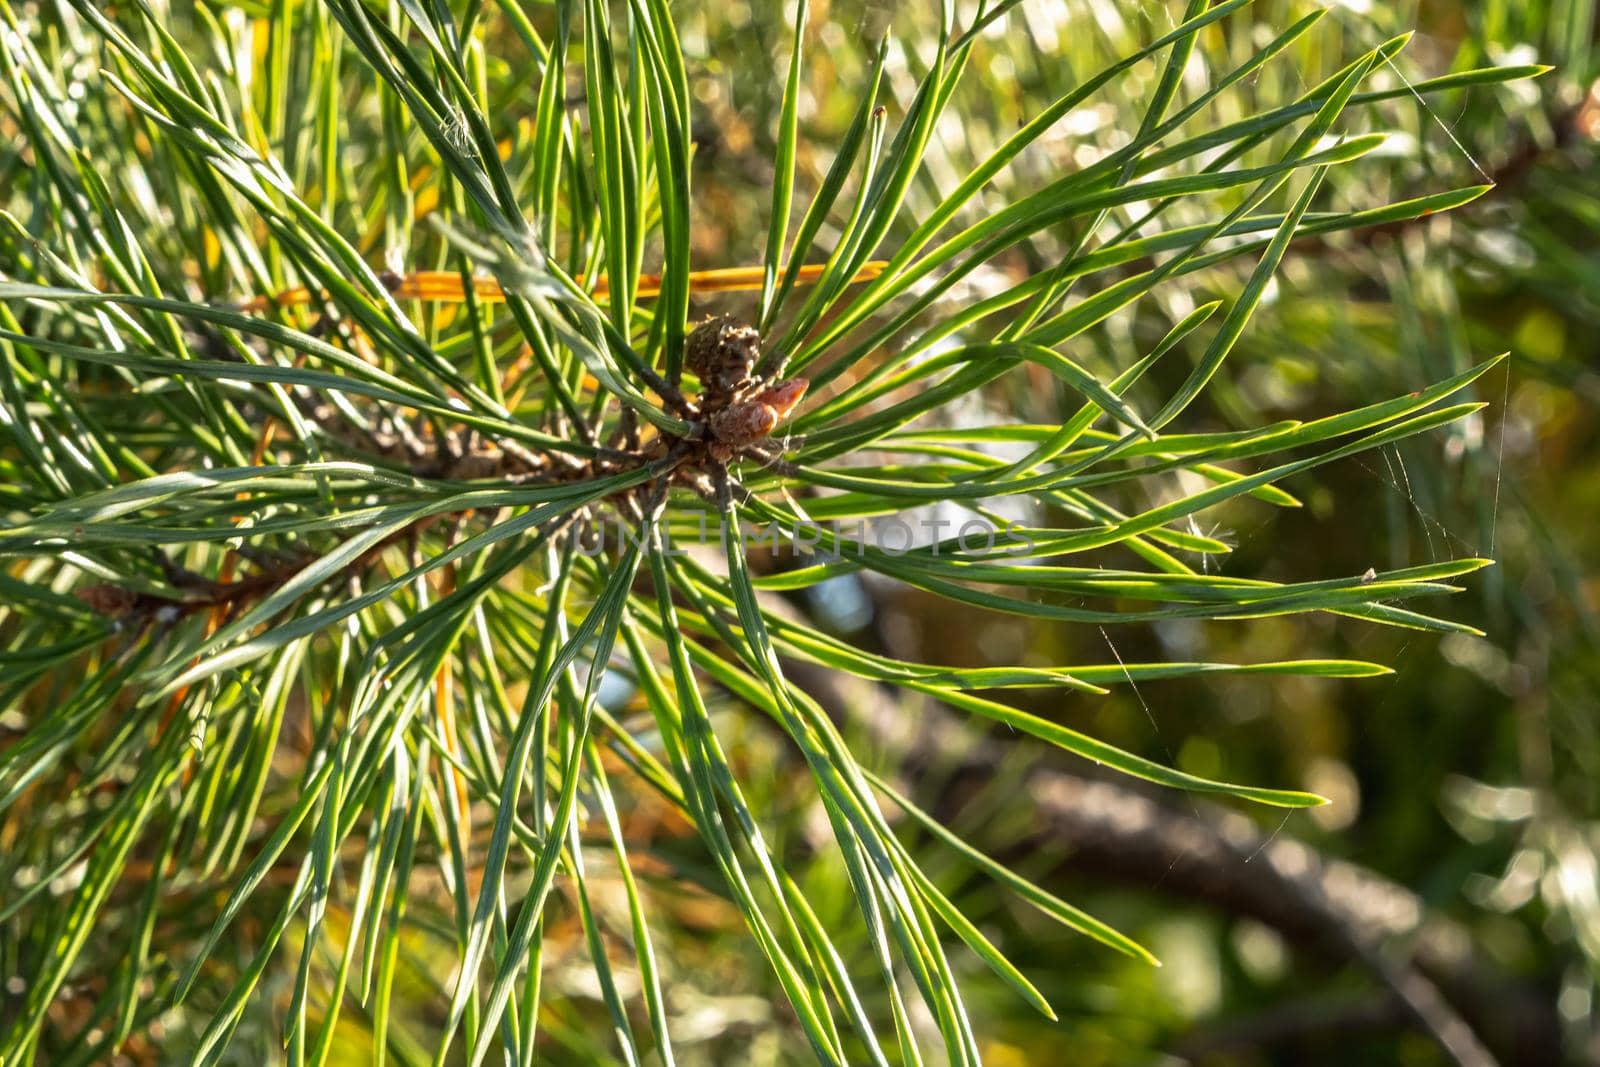 close-up - coniferous pine twig with pine green needles in the forest on a summer day. Horizontal orientetion.